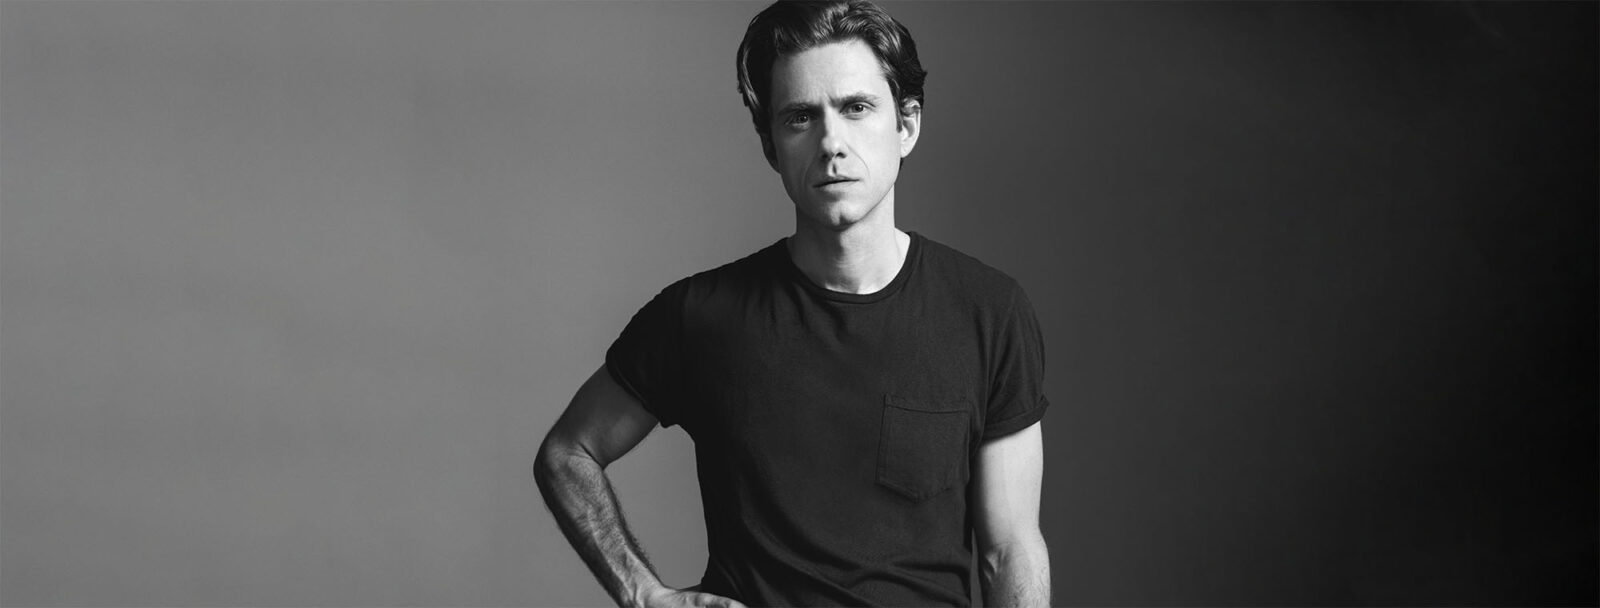 Aaron Tveit, standing up, looking serious in black and white color